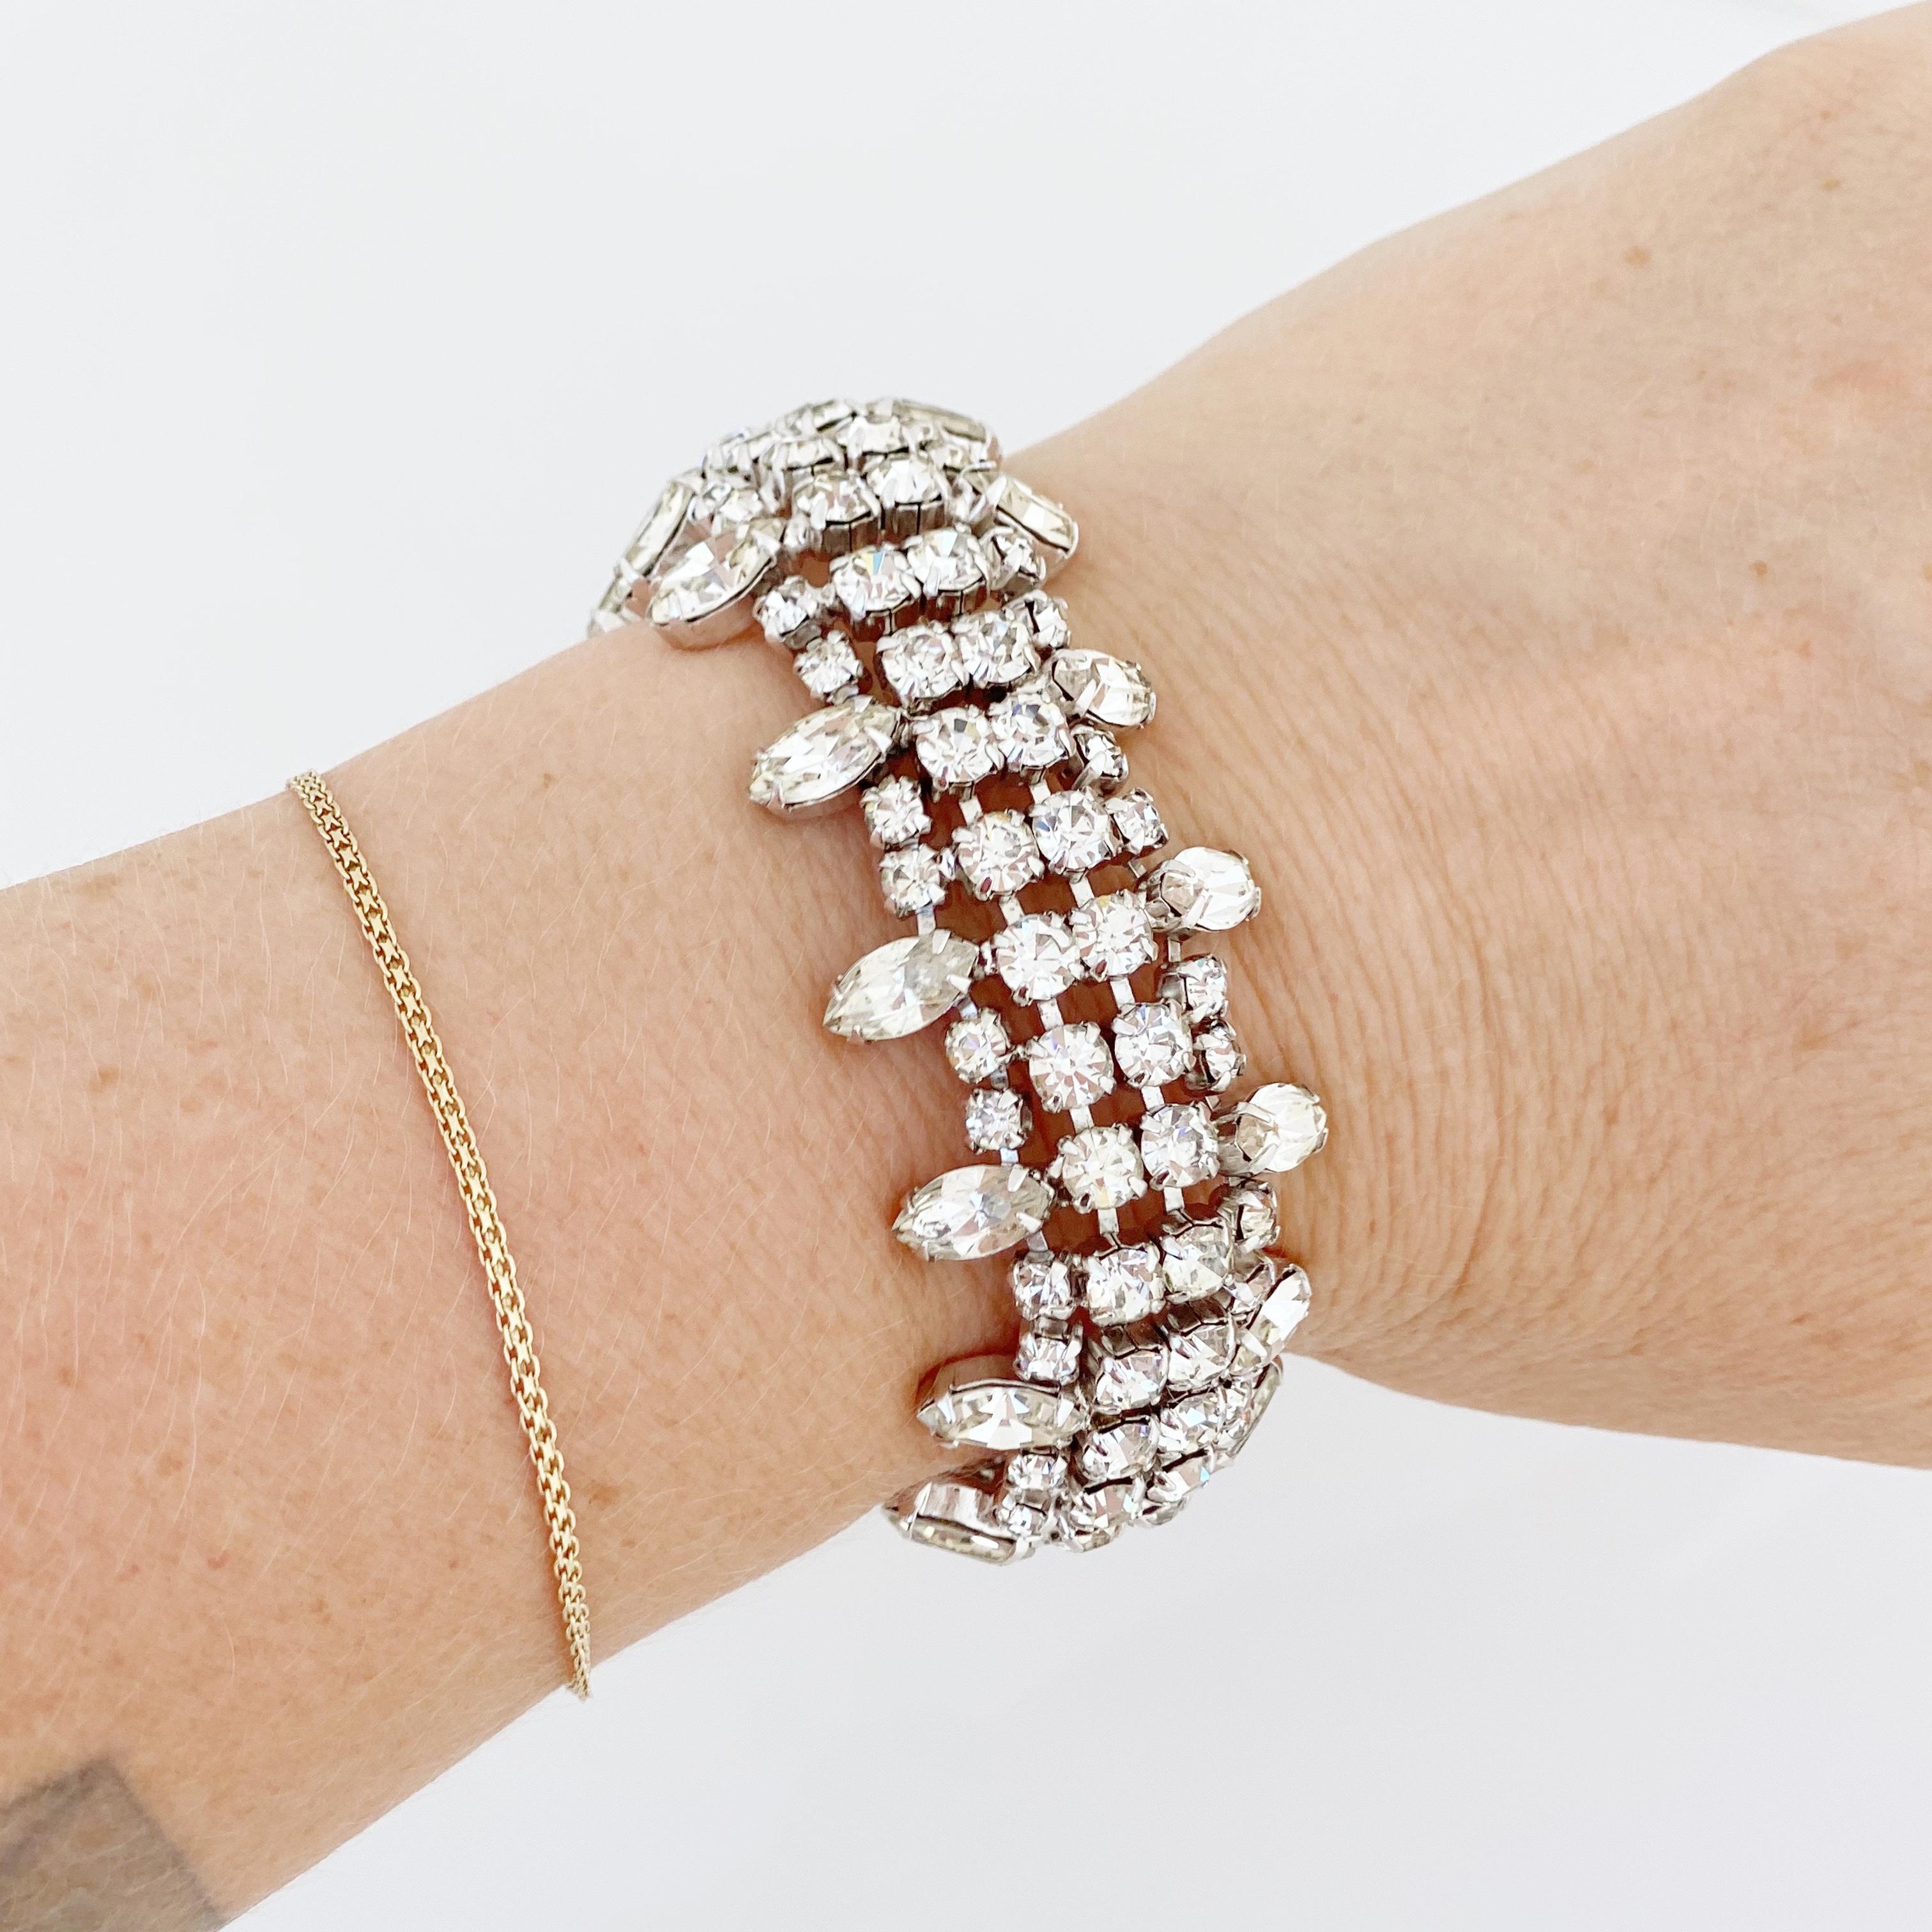 Crystal Cocktail Bracelet With Navette Accents By Weiss, 1950s 2